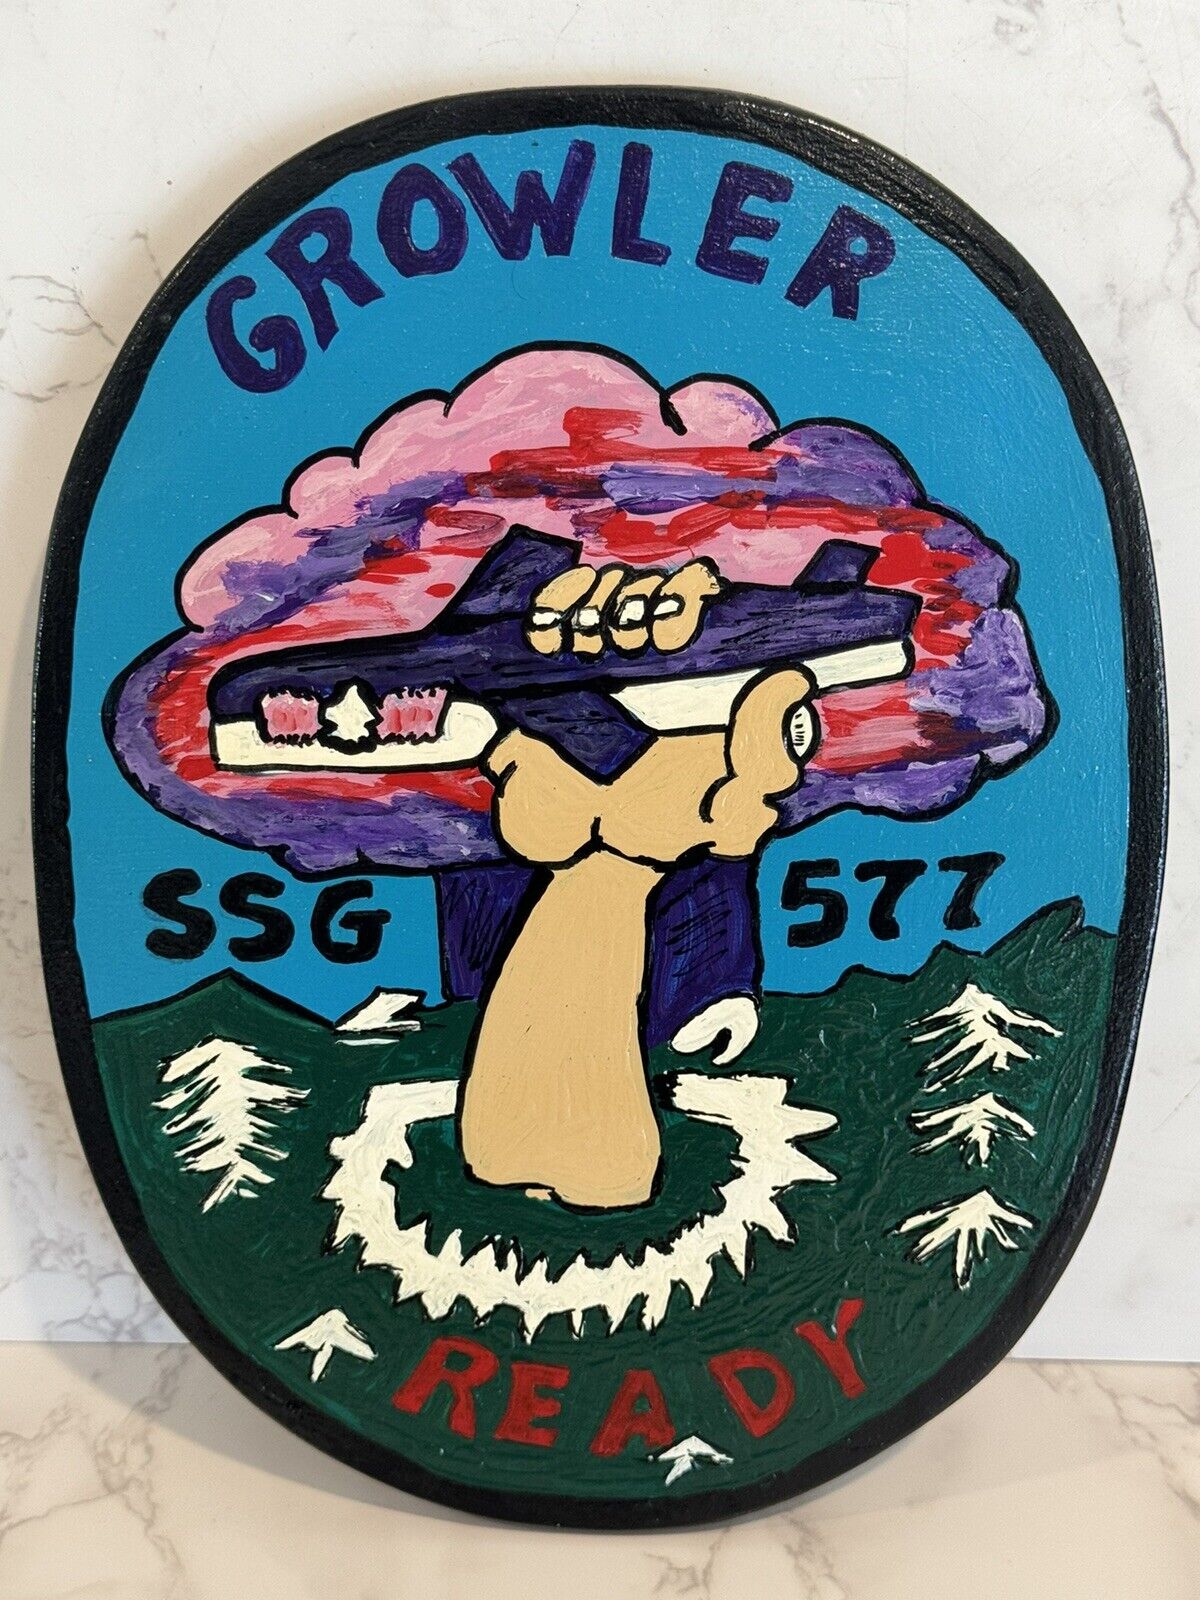 RARE US Navy GROWLER READY SSG 577 Submarine  Wood Plaque Dated 1999